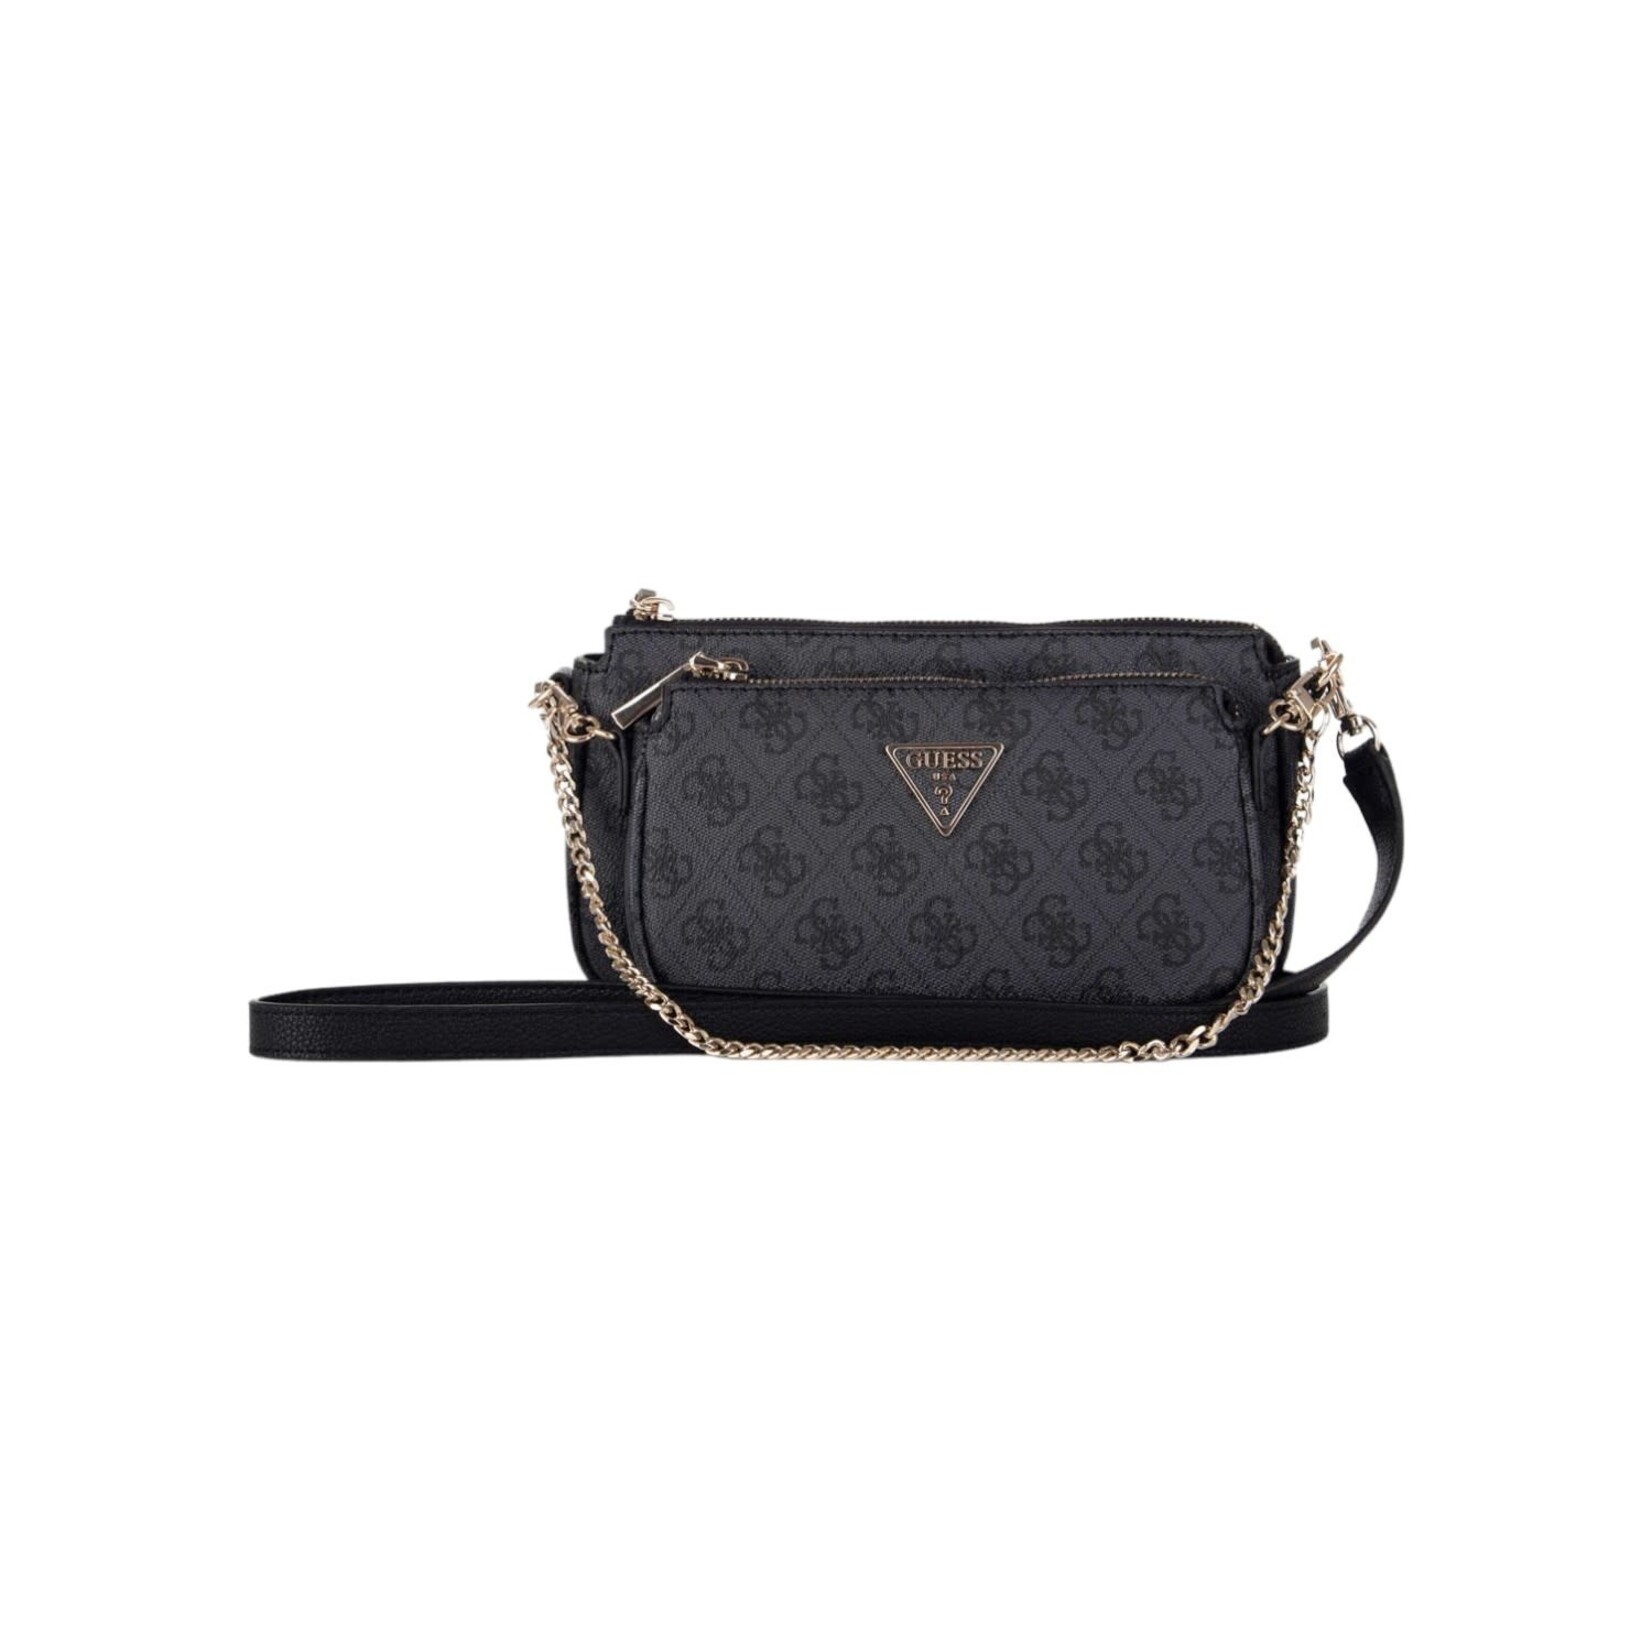 GUESS GUESS NOELLE MINI POUCH CROSSBODY BG787971